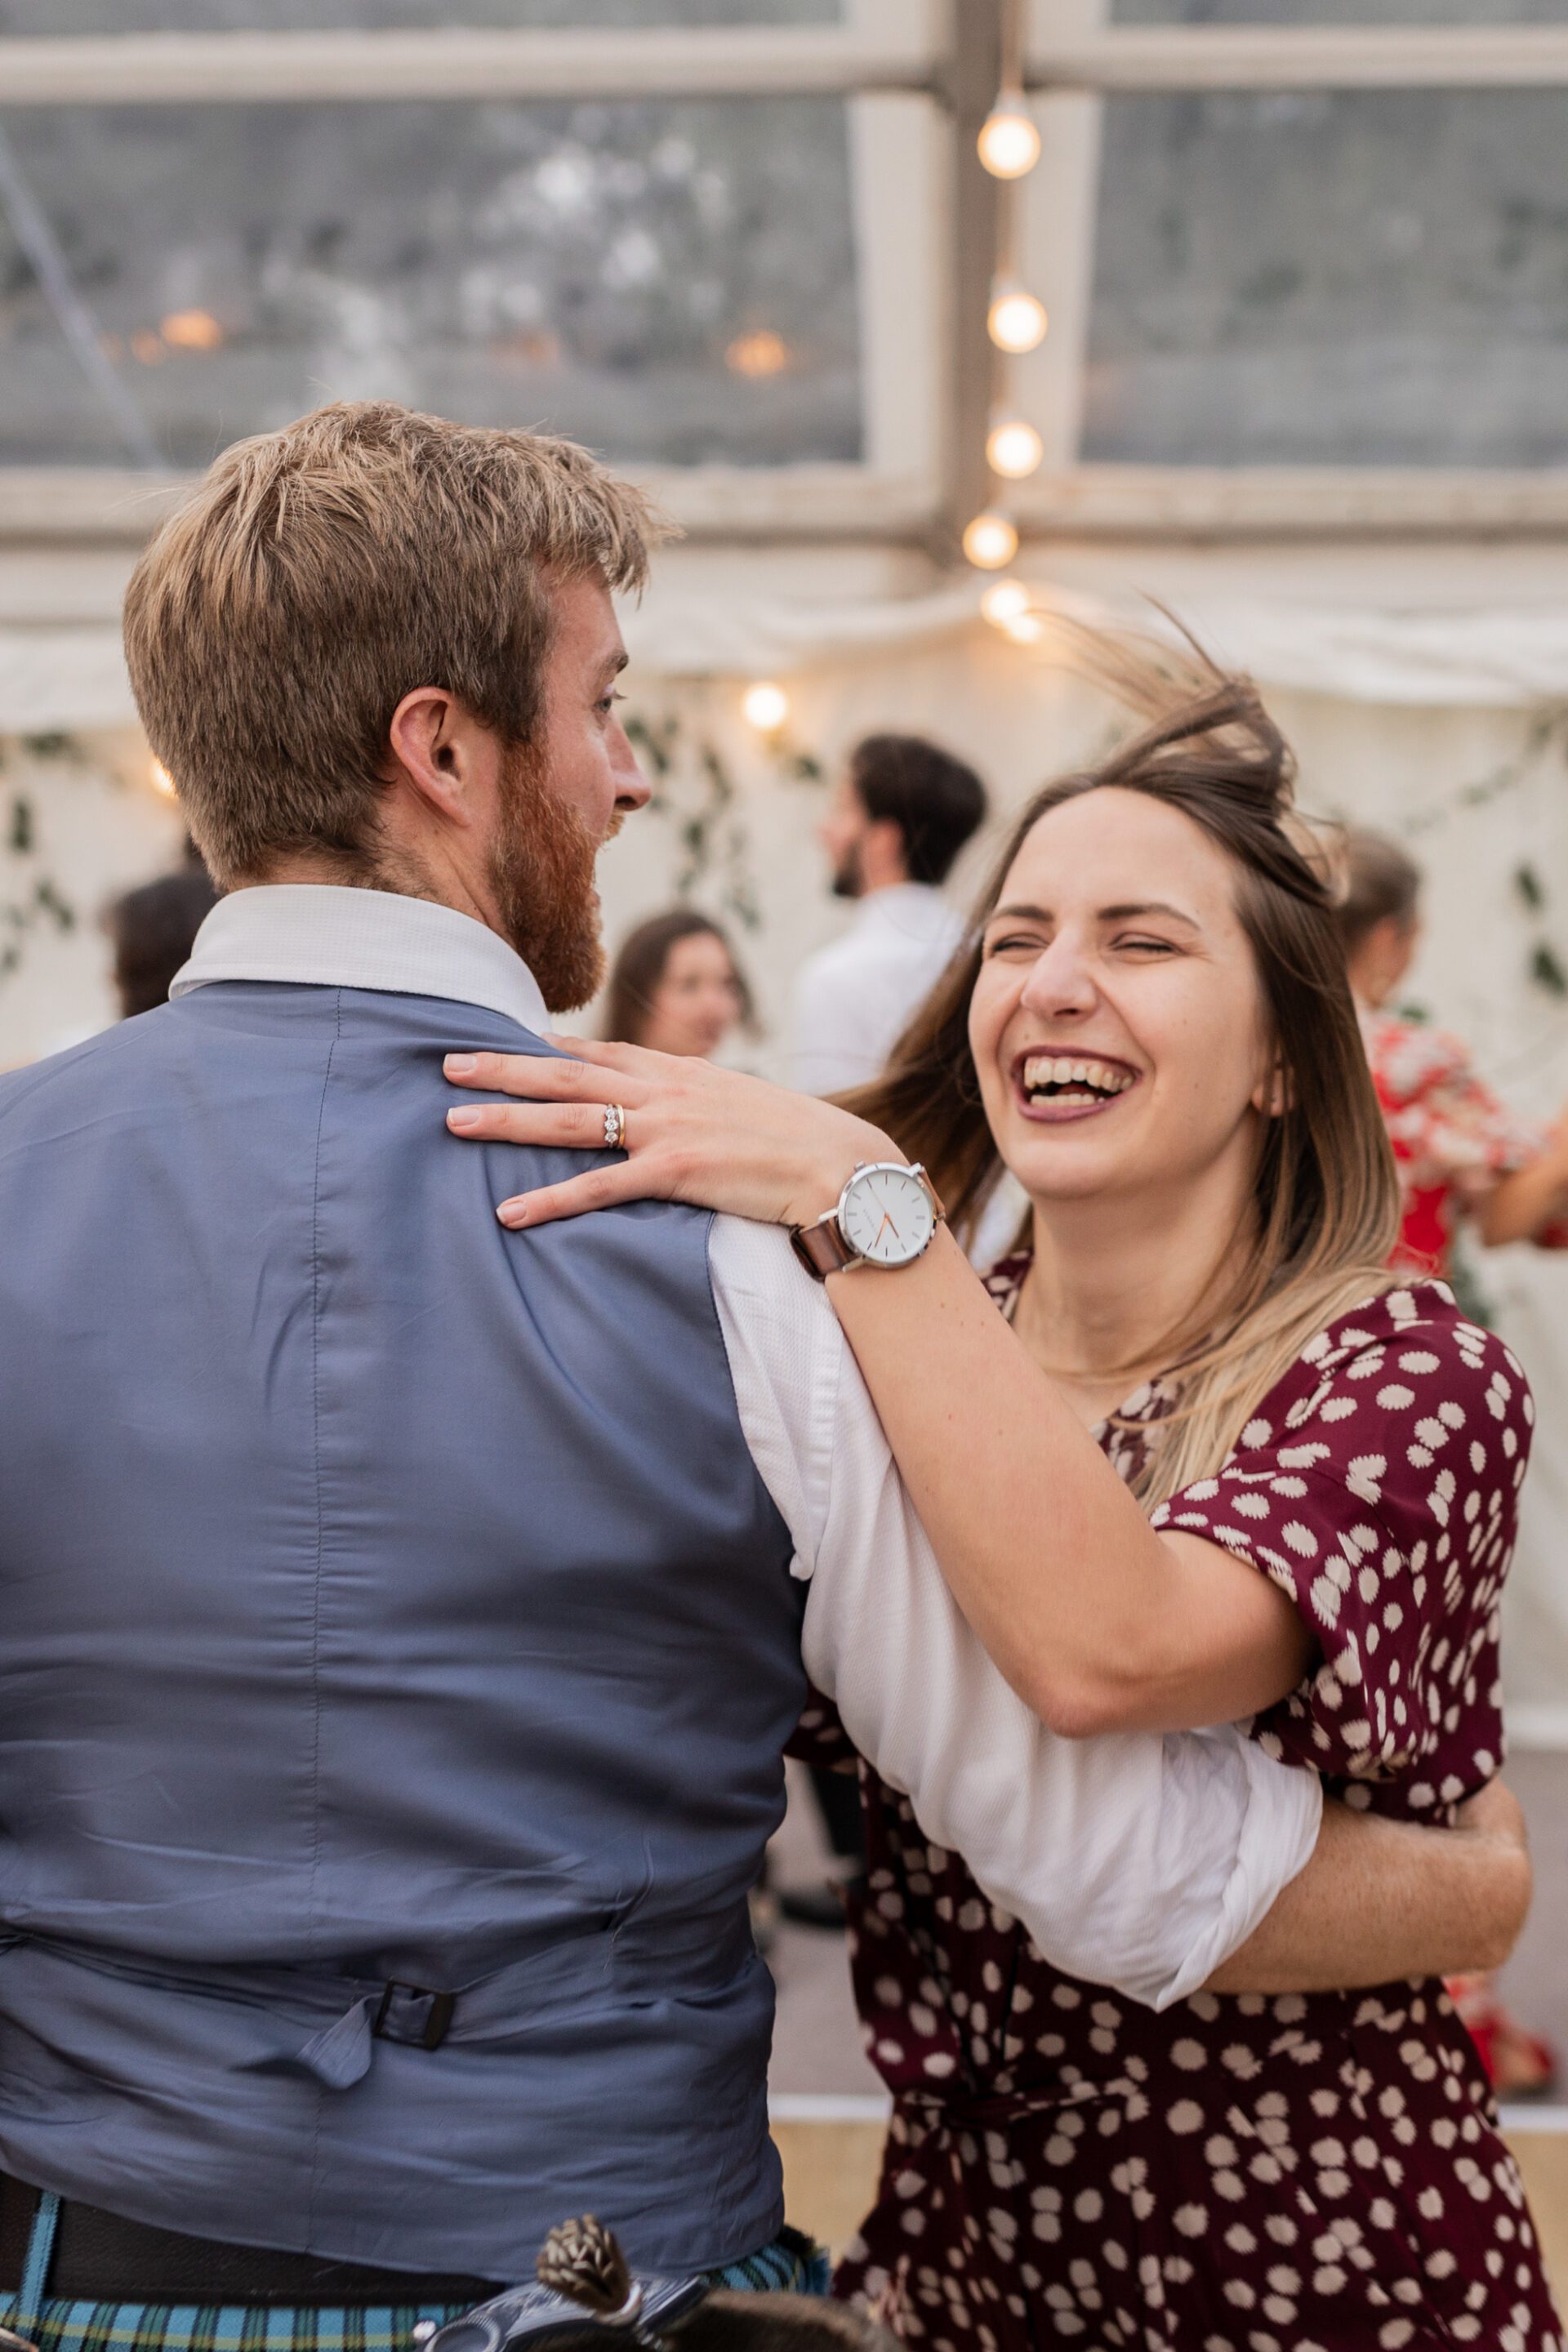 Wedding guests dance together at a marquee wedding